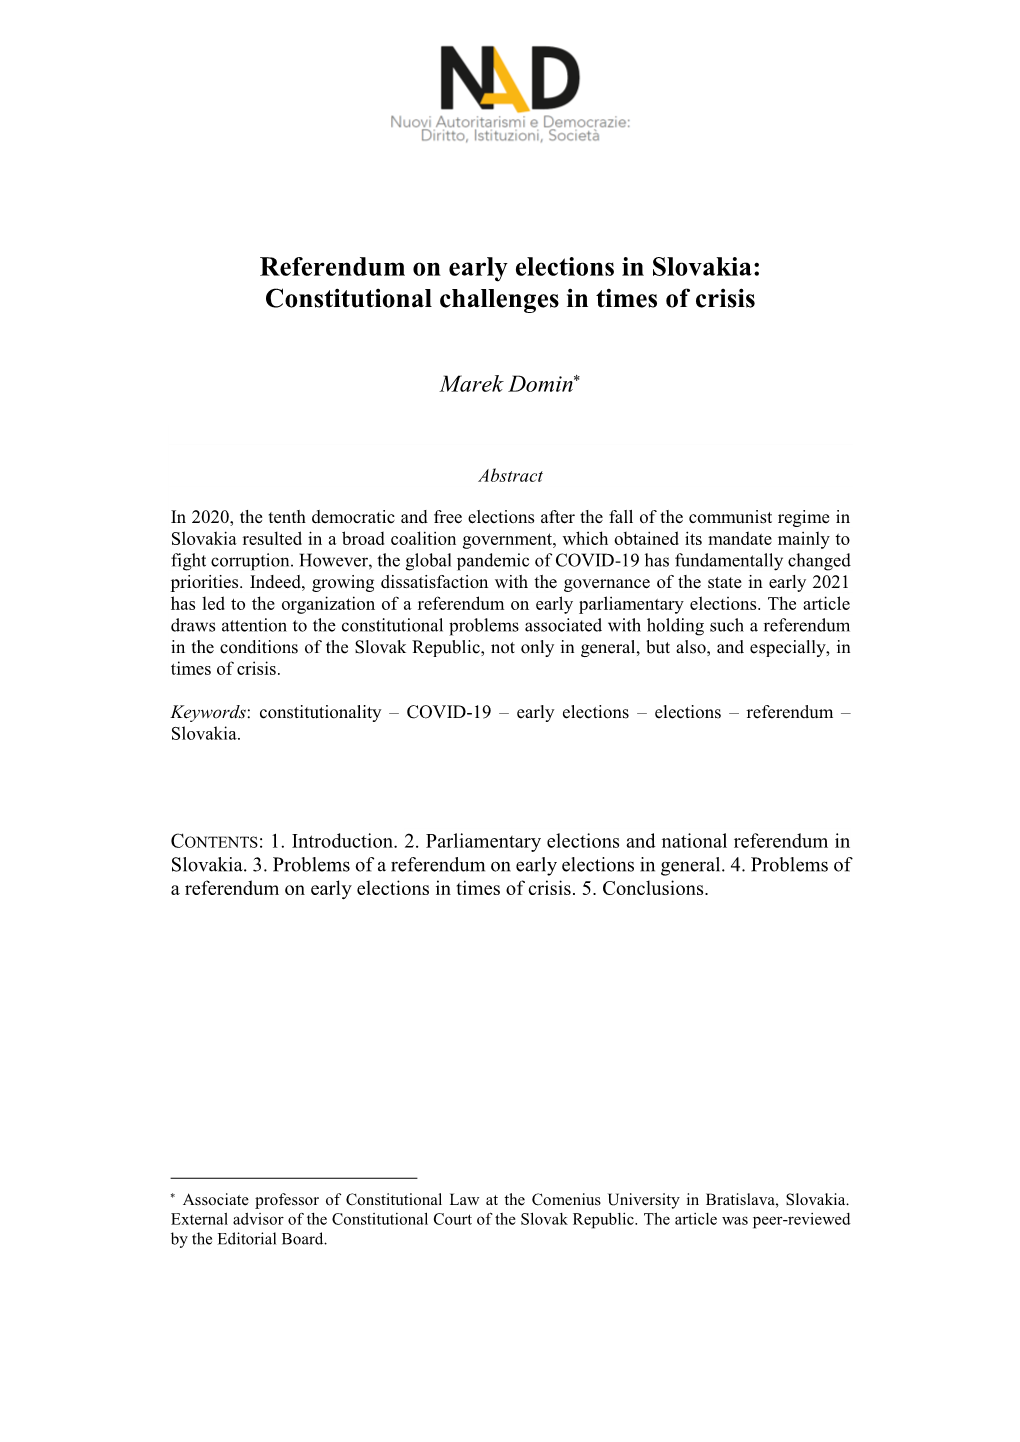 Referendum on Early Elections in Slovakia: Constitutional Challenges in Times of Crisis